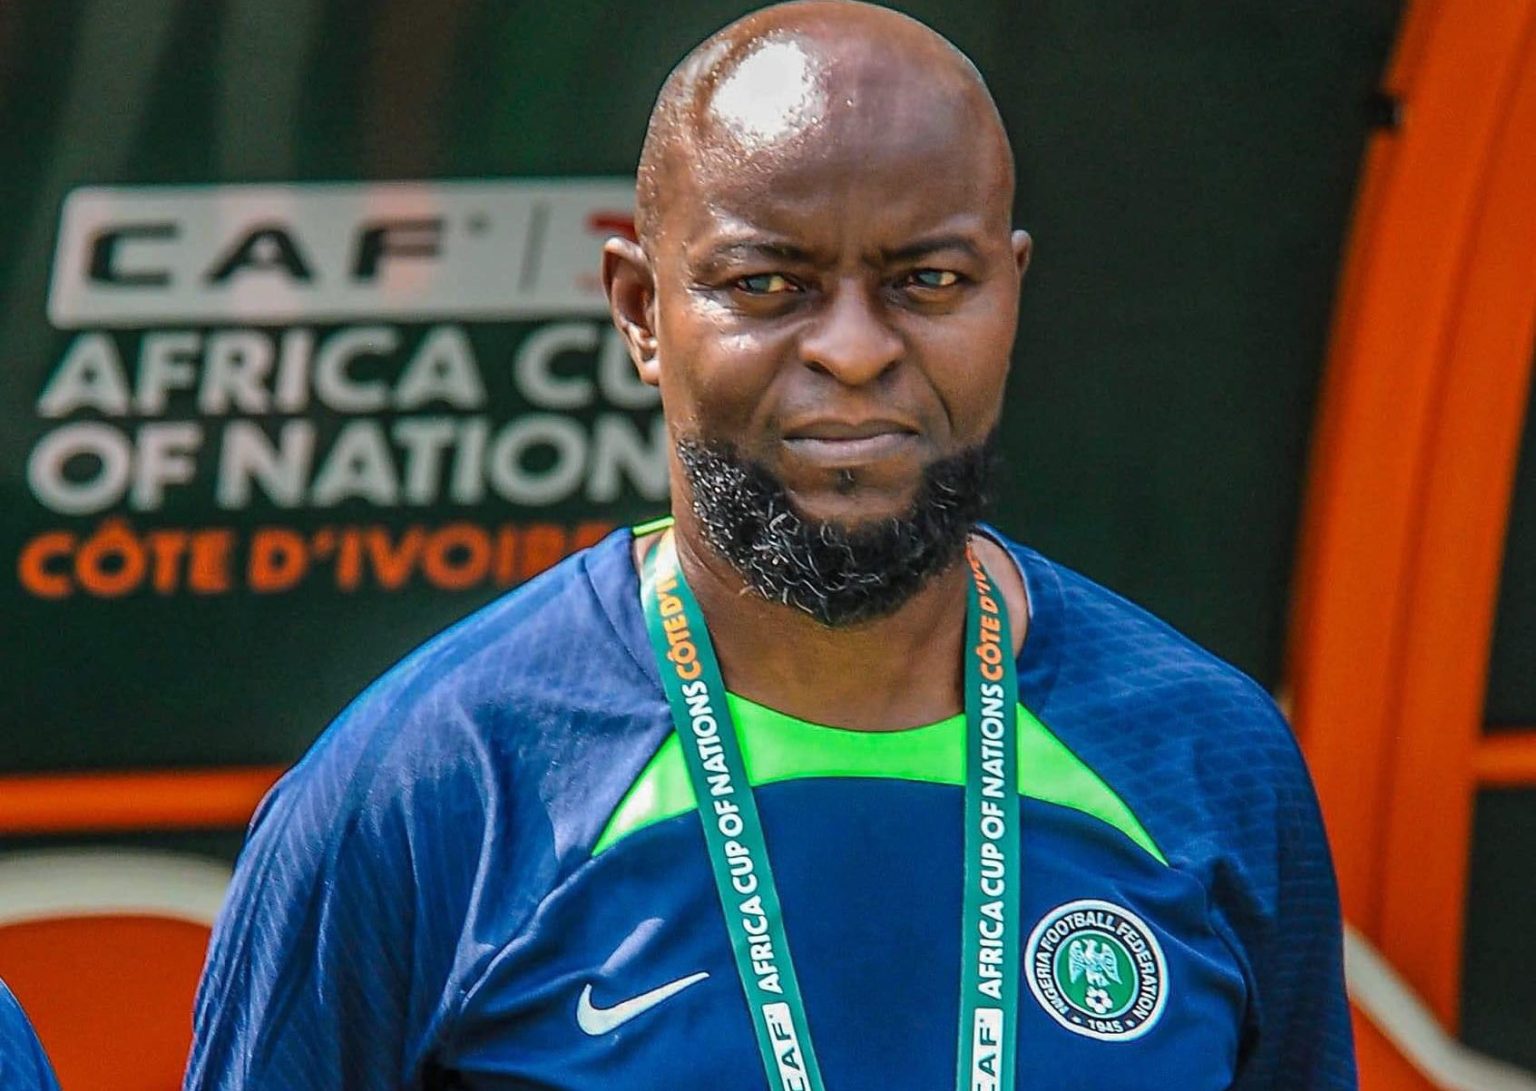 MediaageNG NFF Appoints Finidi As New Super Eagles Coach Ex Nigerian footballer, Finidi George has been named the new head coach of the Super Eagles.